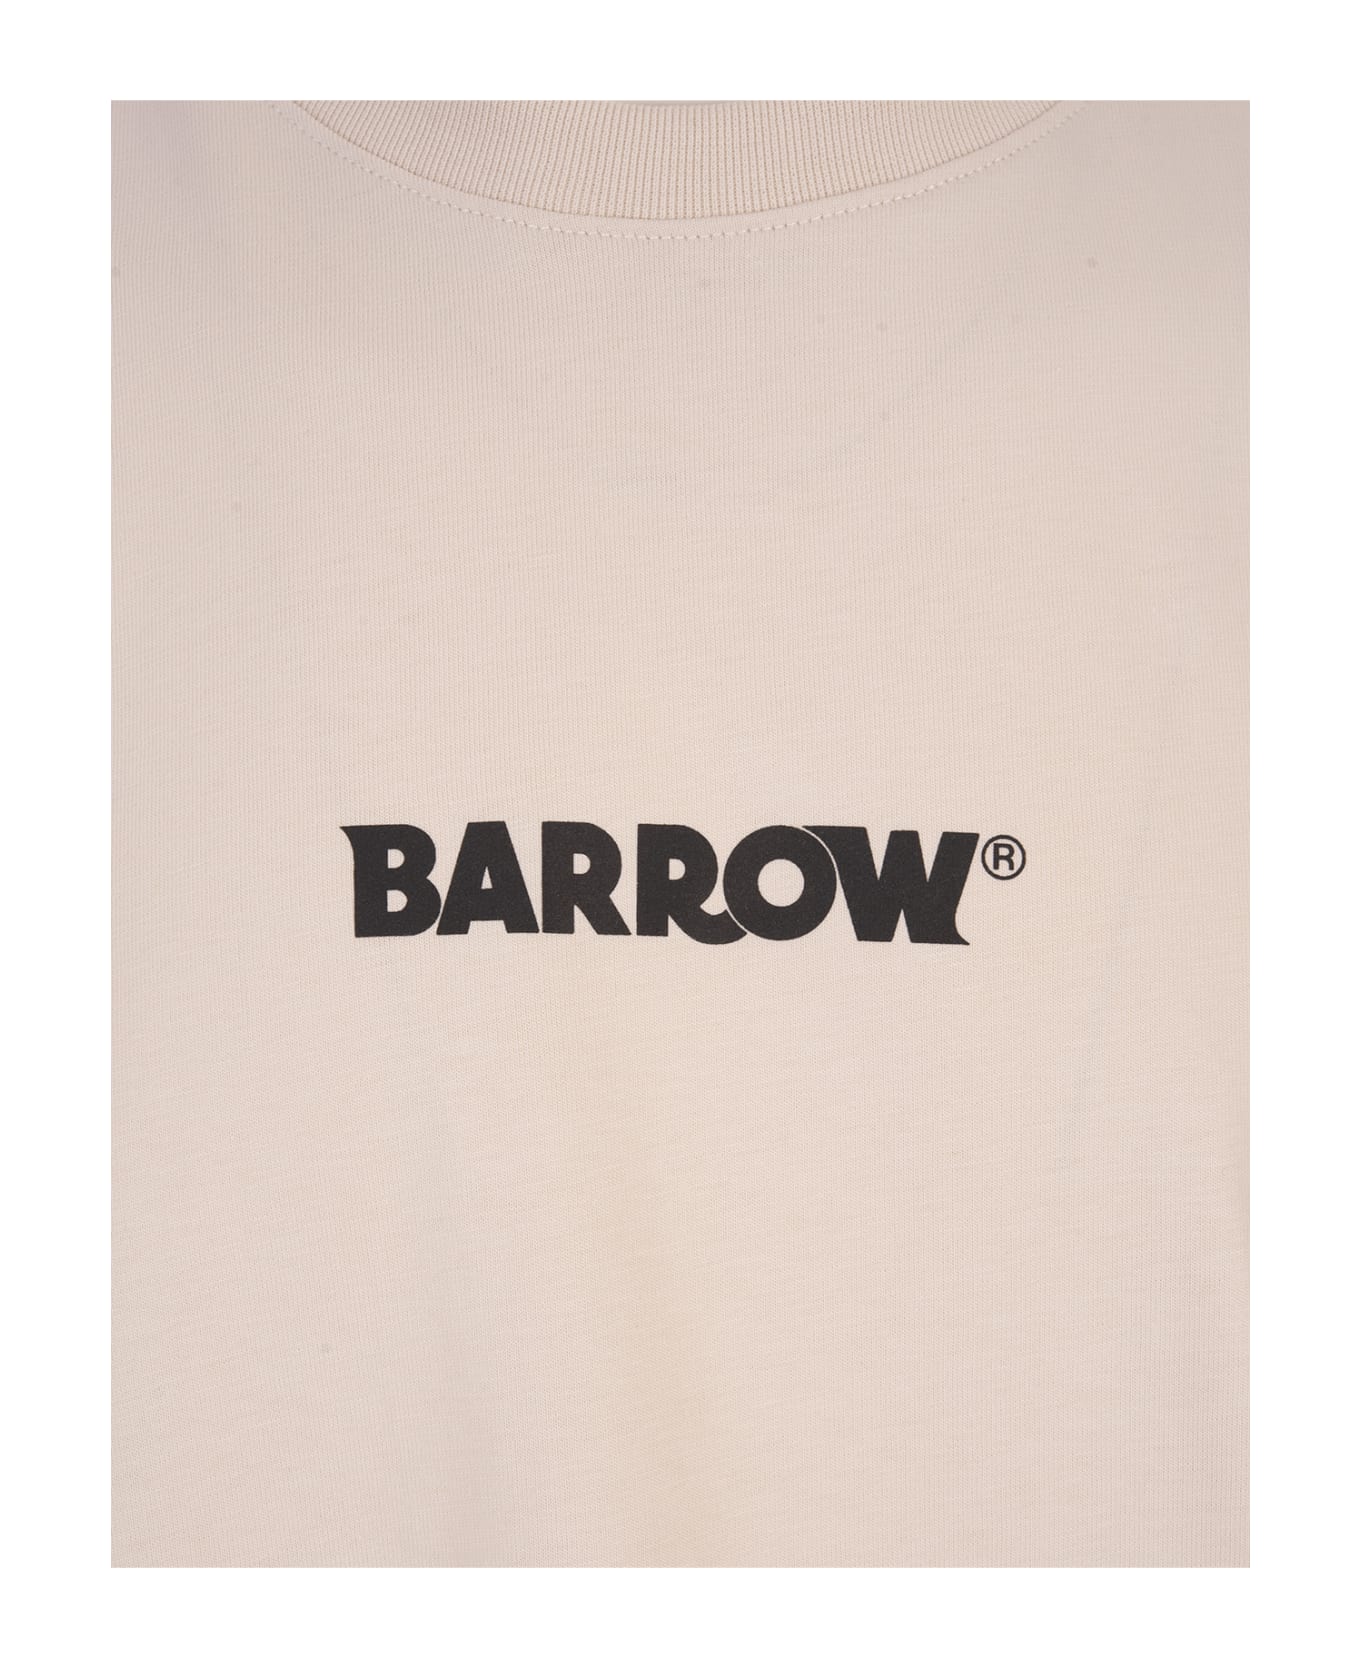 Barrow Dove T-shirt With Front And Back Logo Print - Beige